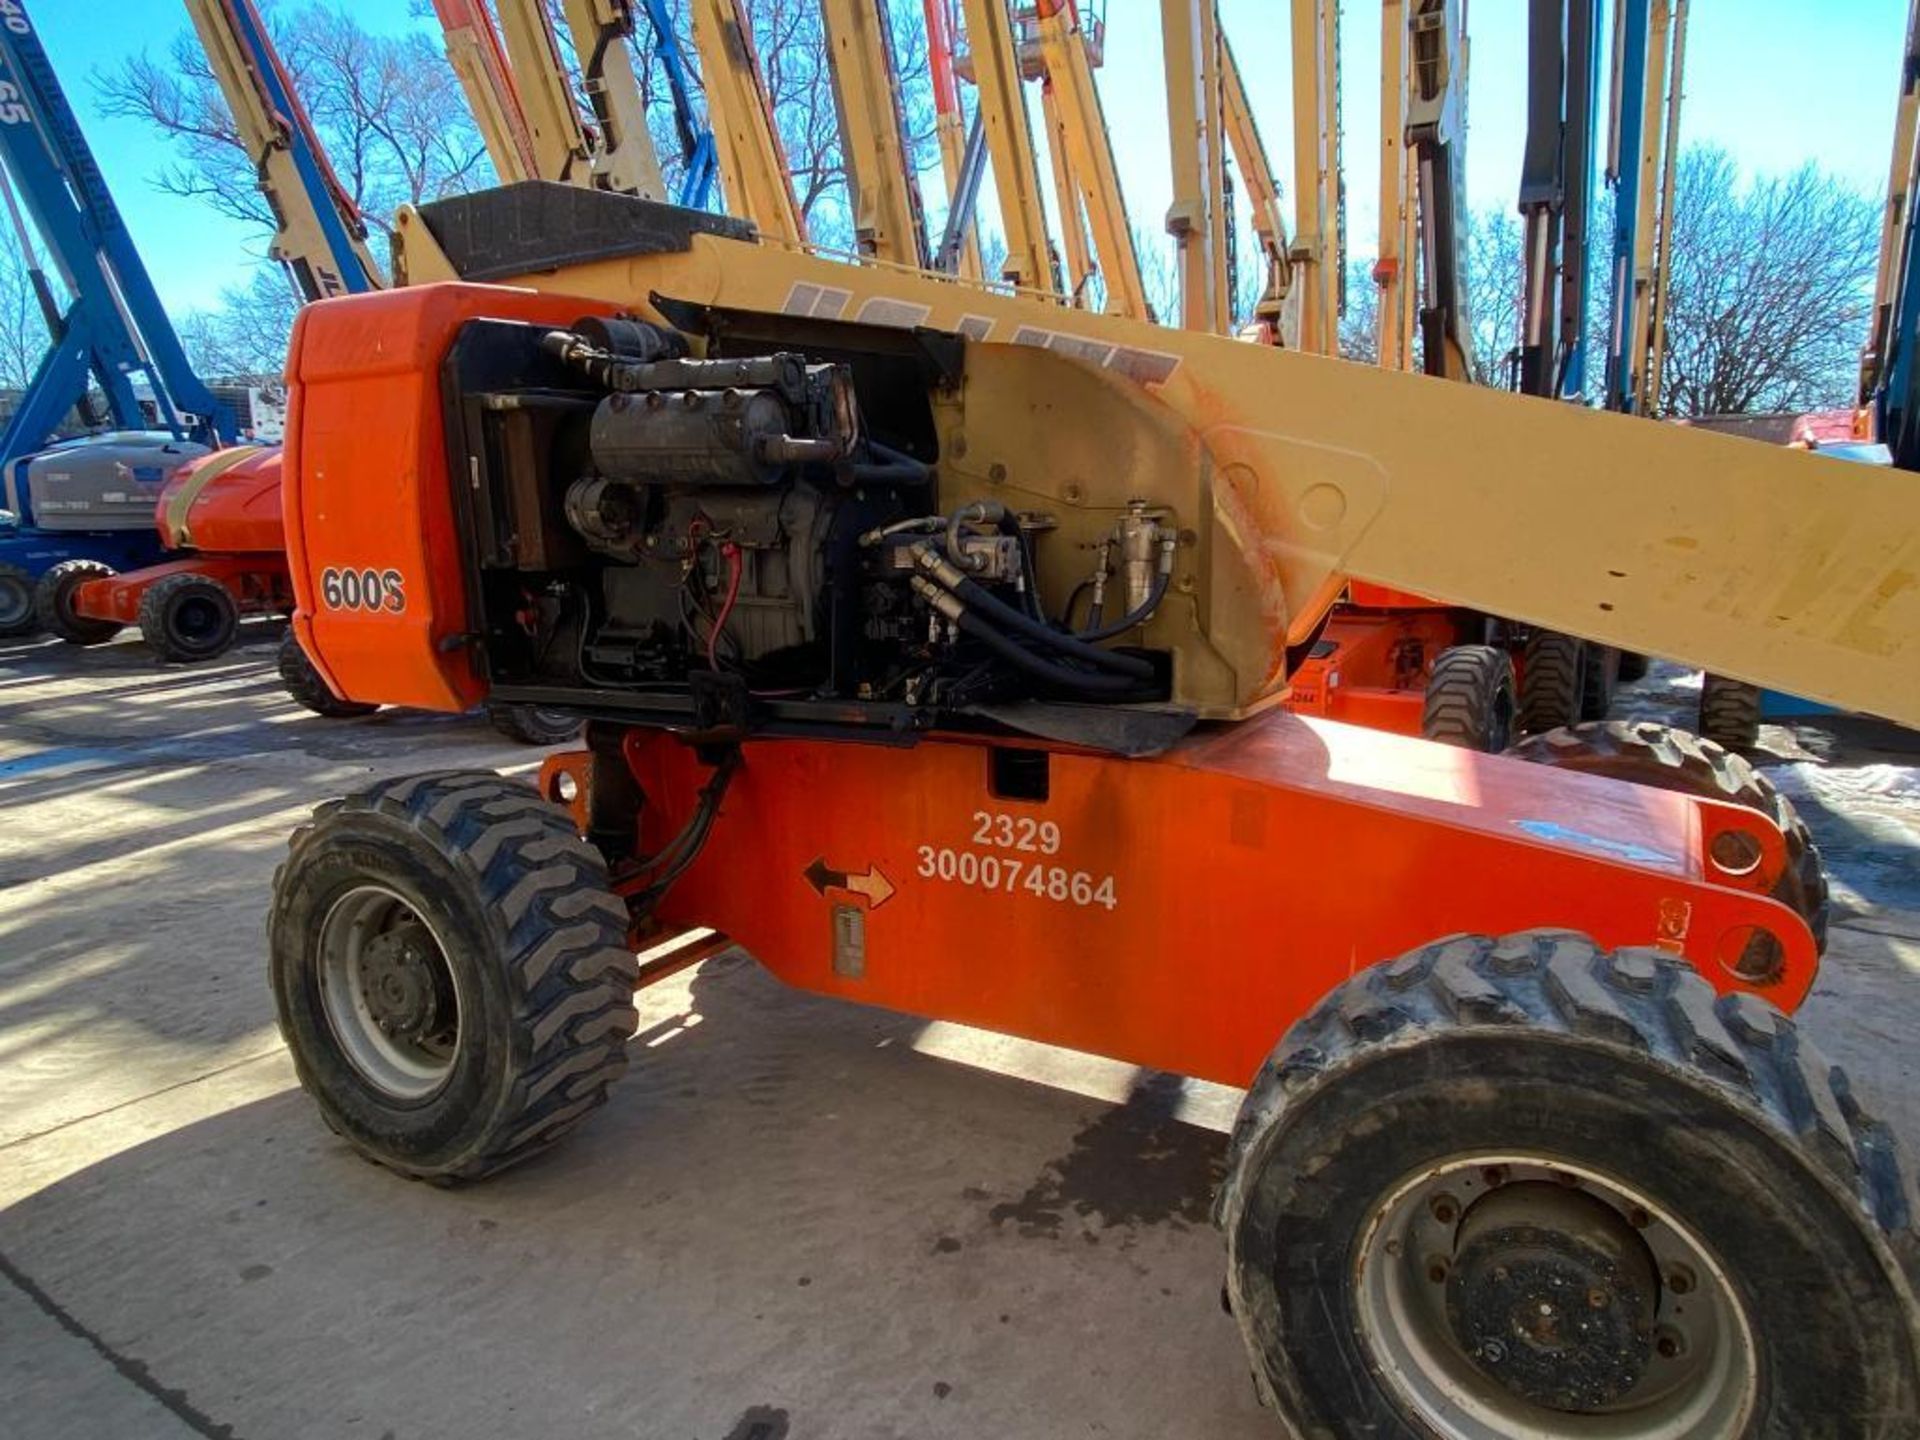 JLG 600S Rough Terrain Boom Lift (S/N 300074864, Year 2004), with 60' Platform Height, 49.47' - Image 7 of 13